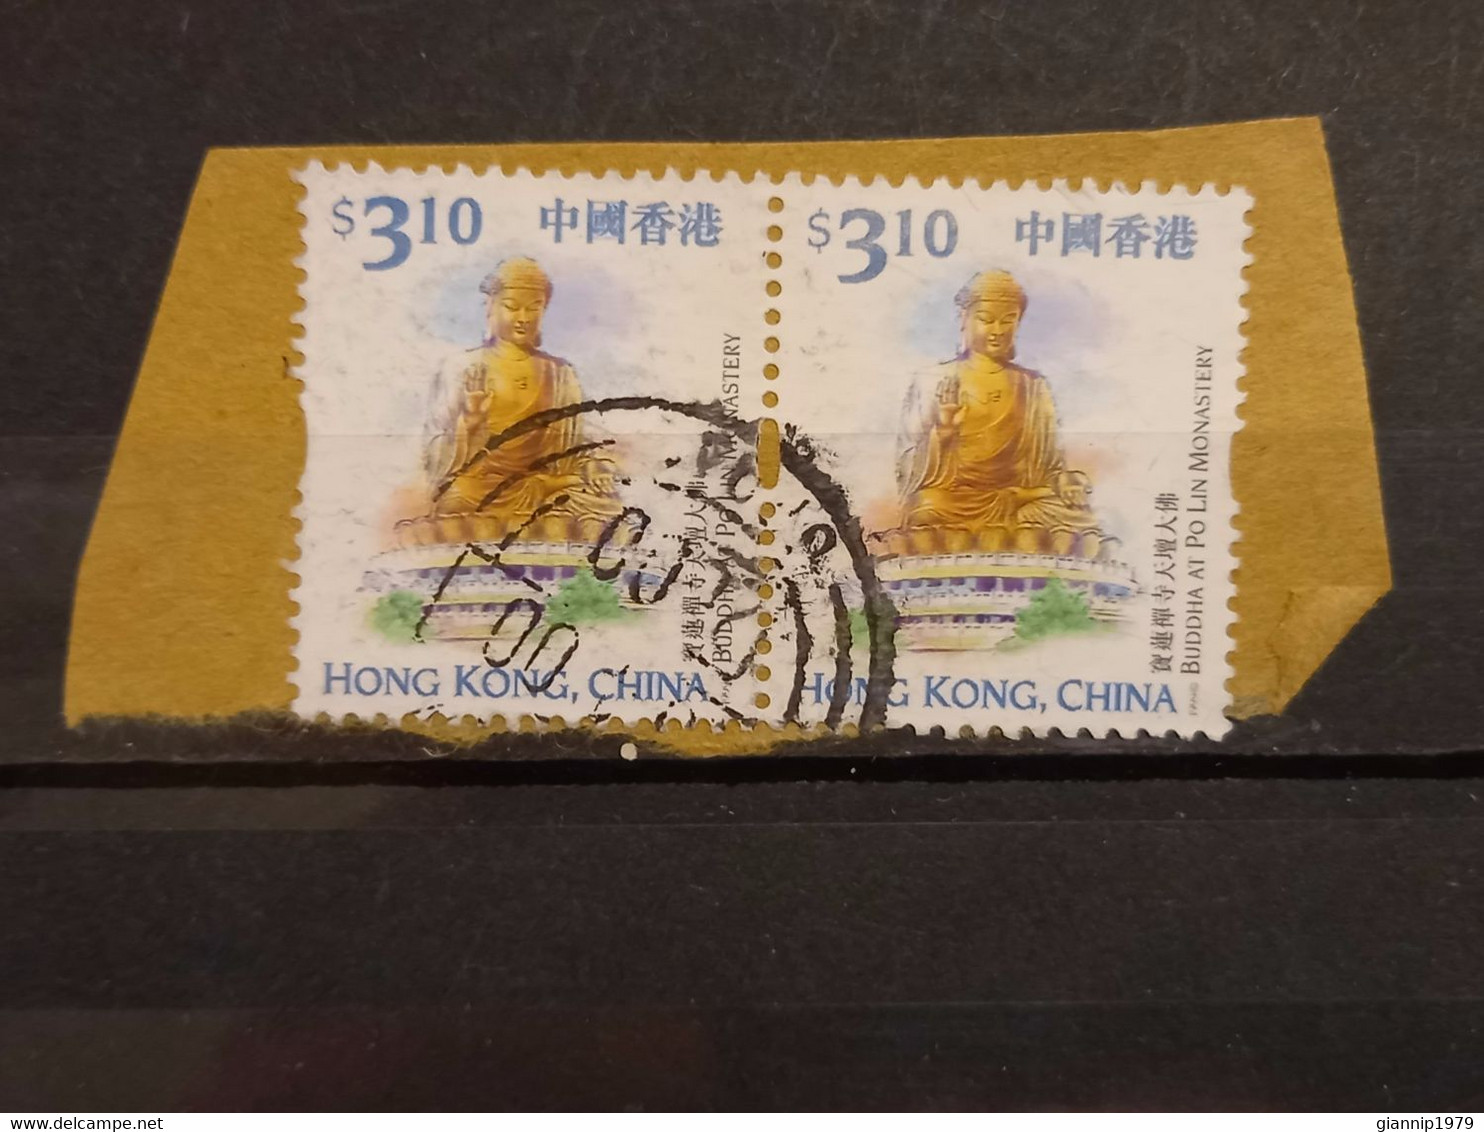 FRANCOBOLLI STAMPS HONG KONG 2000 USED FRAMMENTO ATTRAZIONI ATTRACTIONS OBLITERE' FRAGMENT - Gebruikt